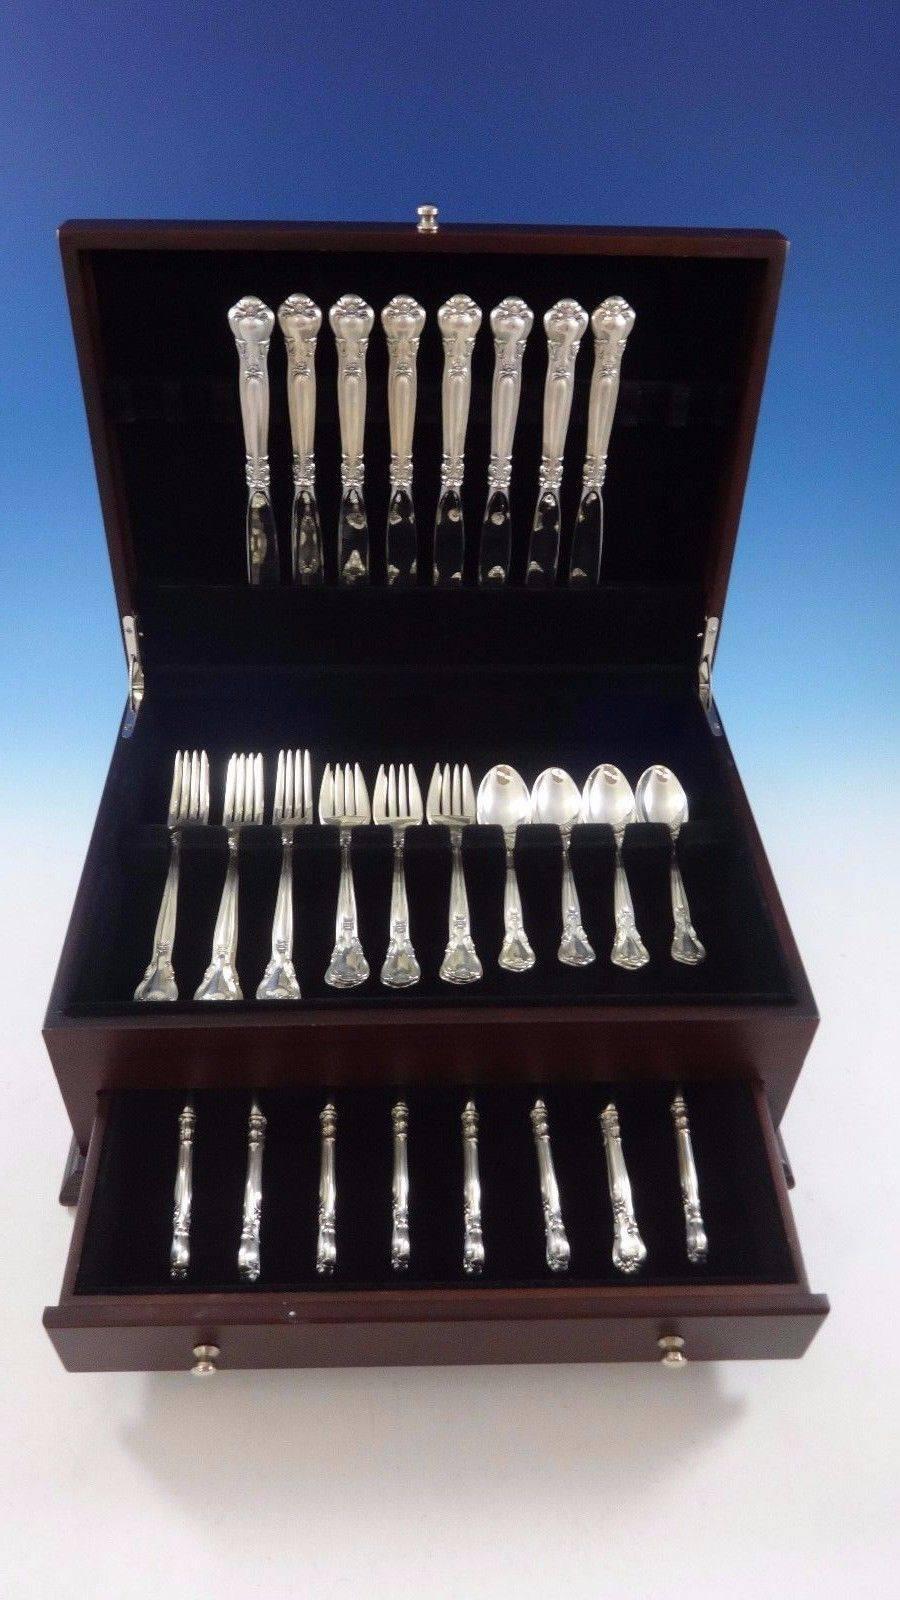 Chantilly by Gorham sterling silver place size flatware set of 40 pieces. This set includes: Eight place size knives, 9 1/4